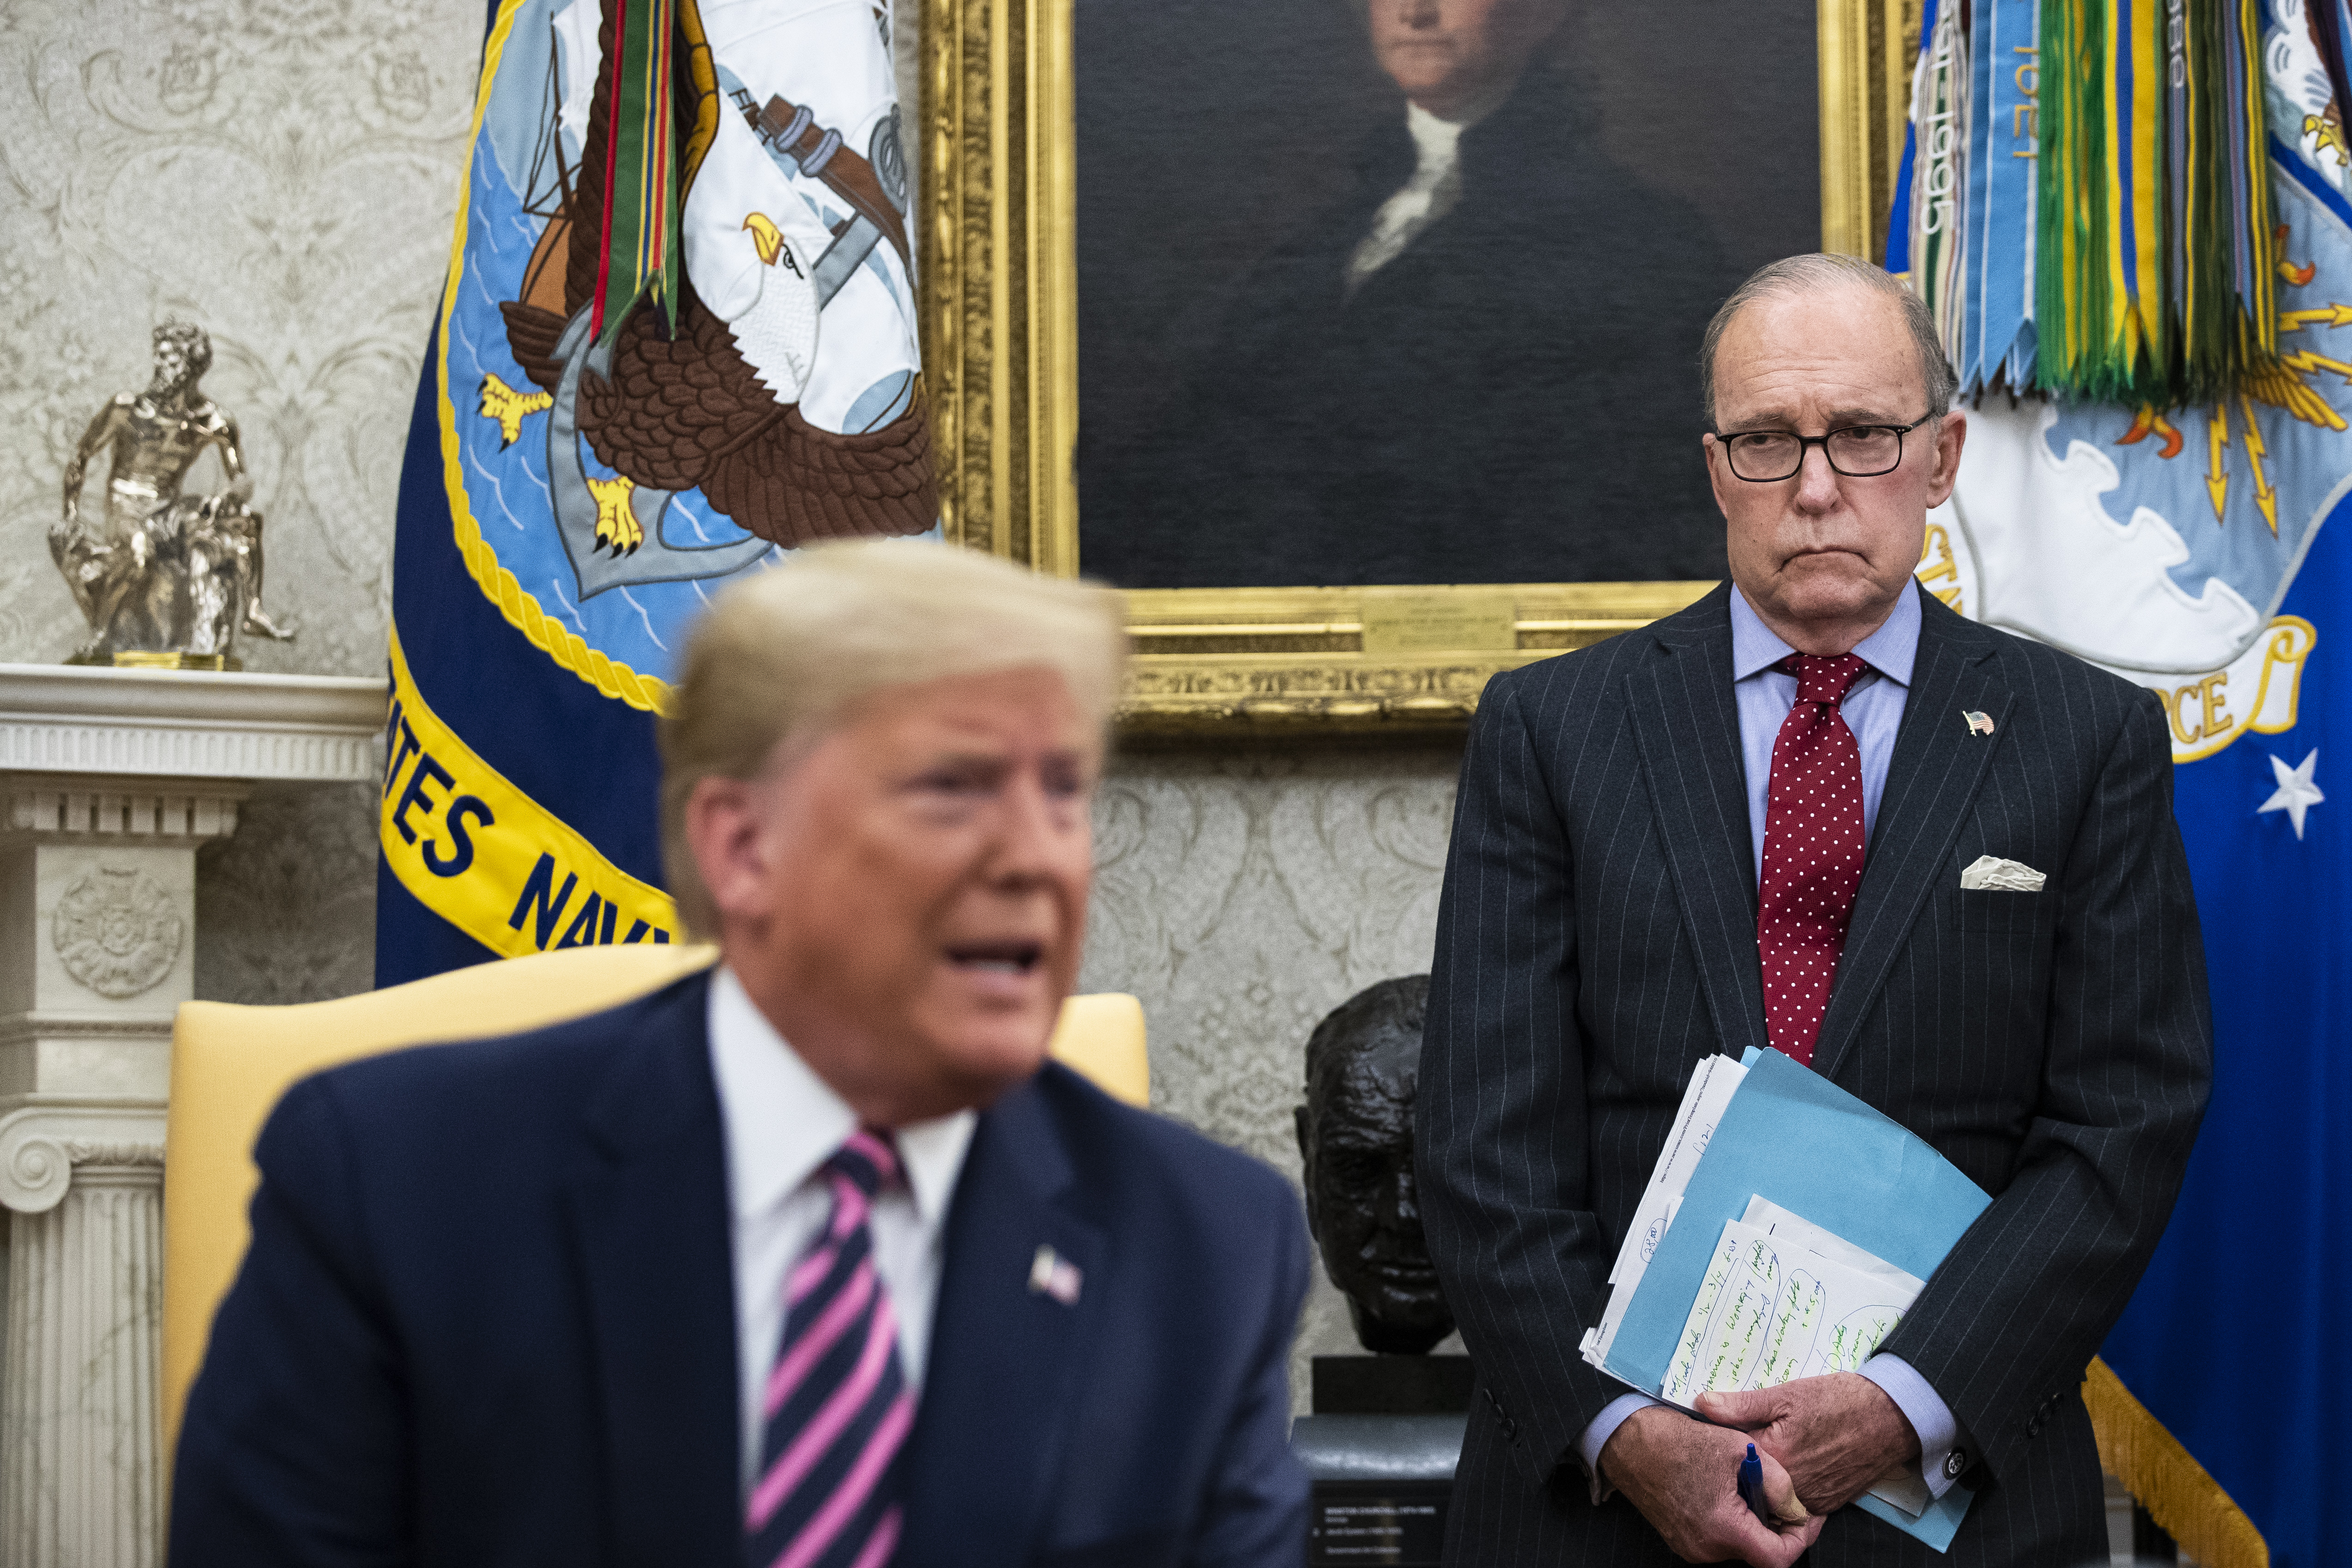 National Economic Council Director Larry Kudlow (R) looks on as U.S. President Donald Trump speaks to reporters in the Oval Office of the White House. (Drew Angerer/Getty Images)